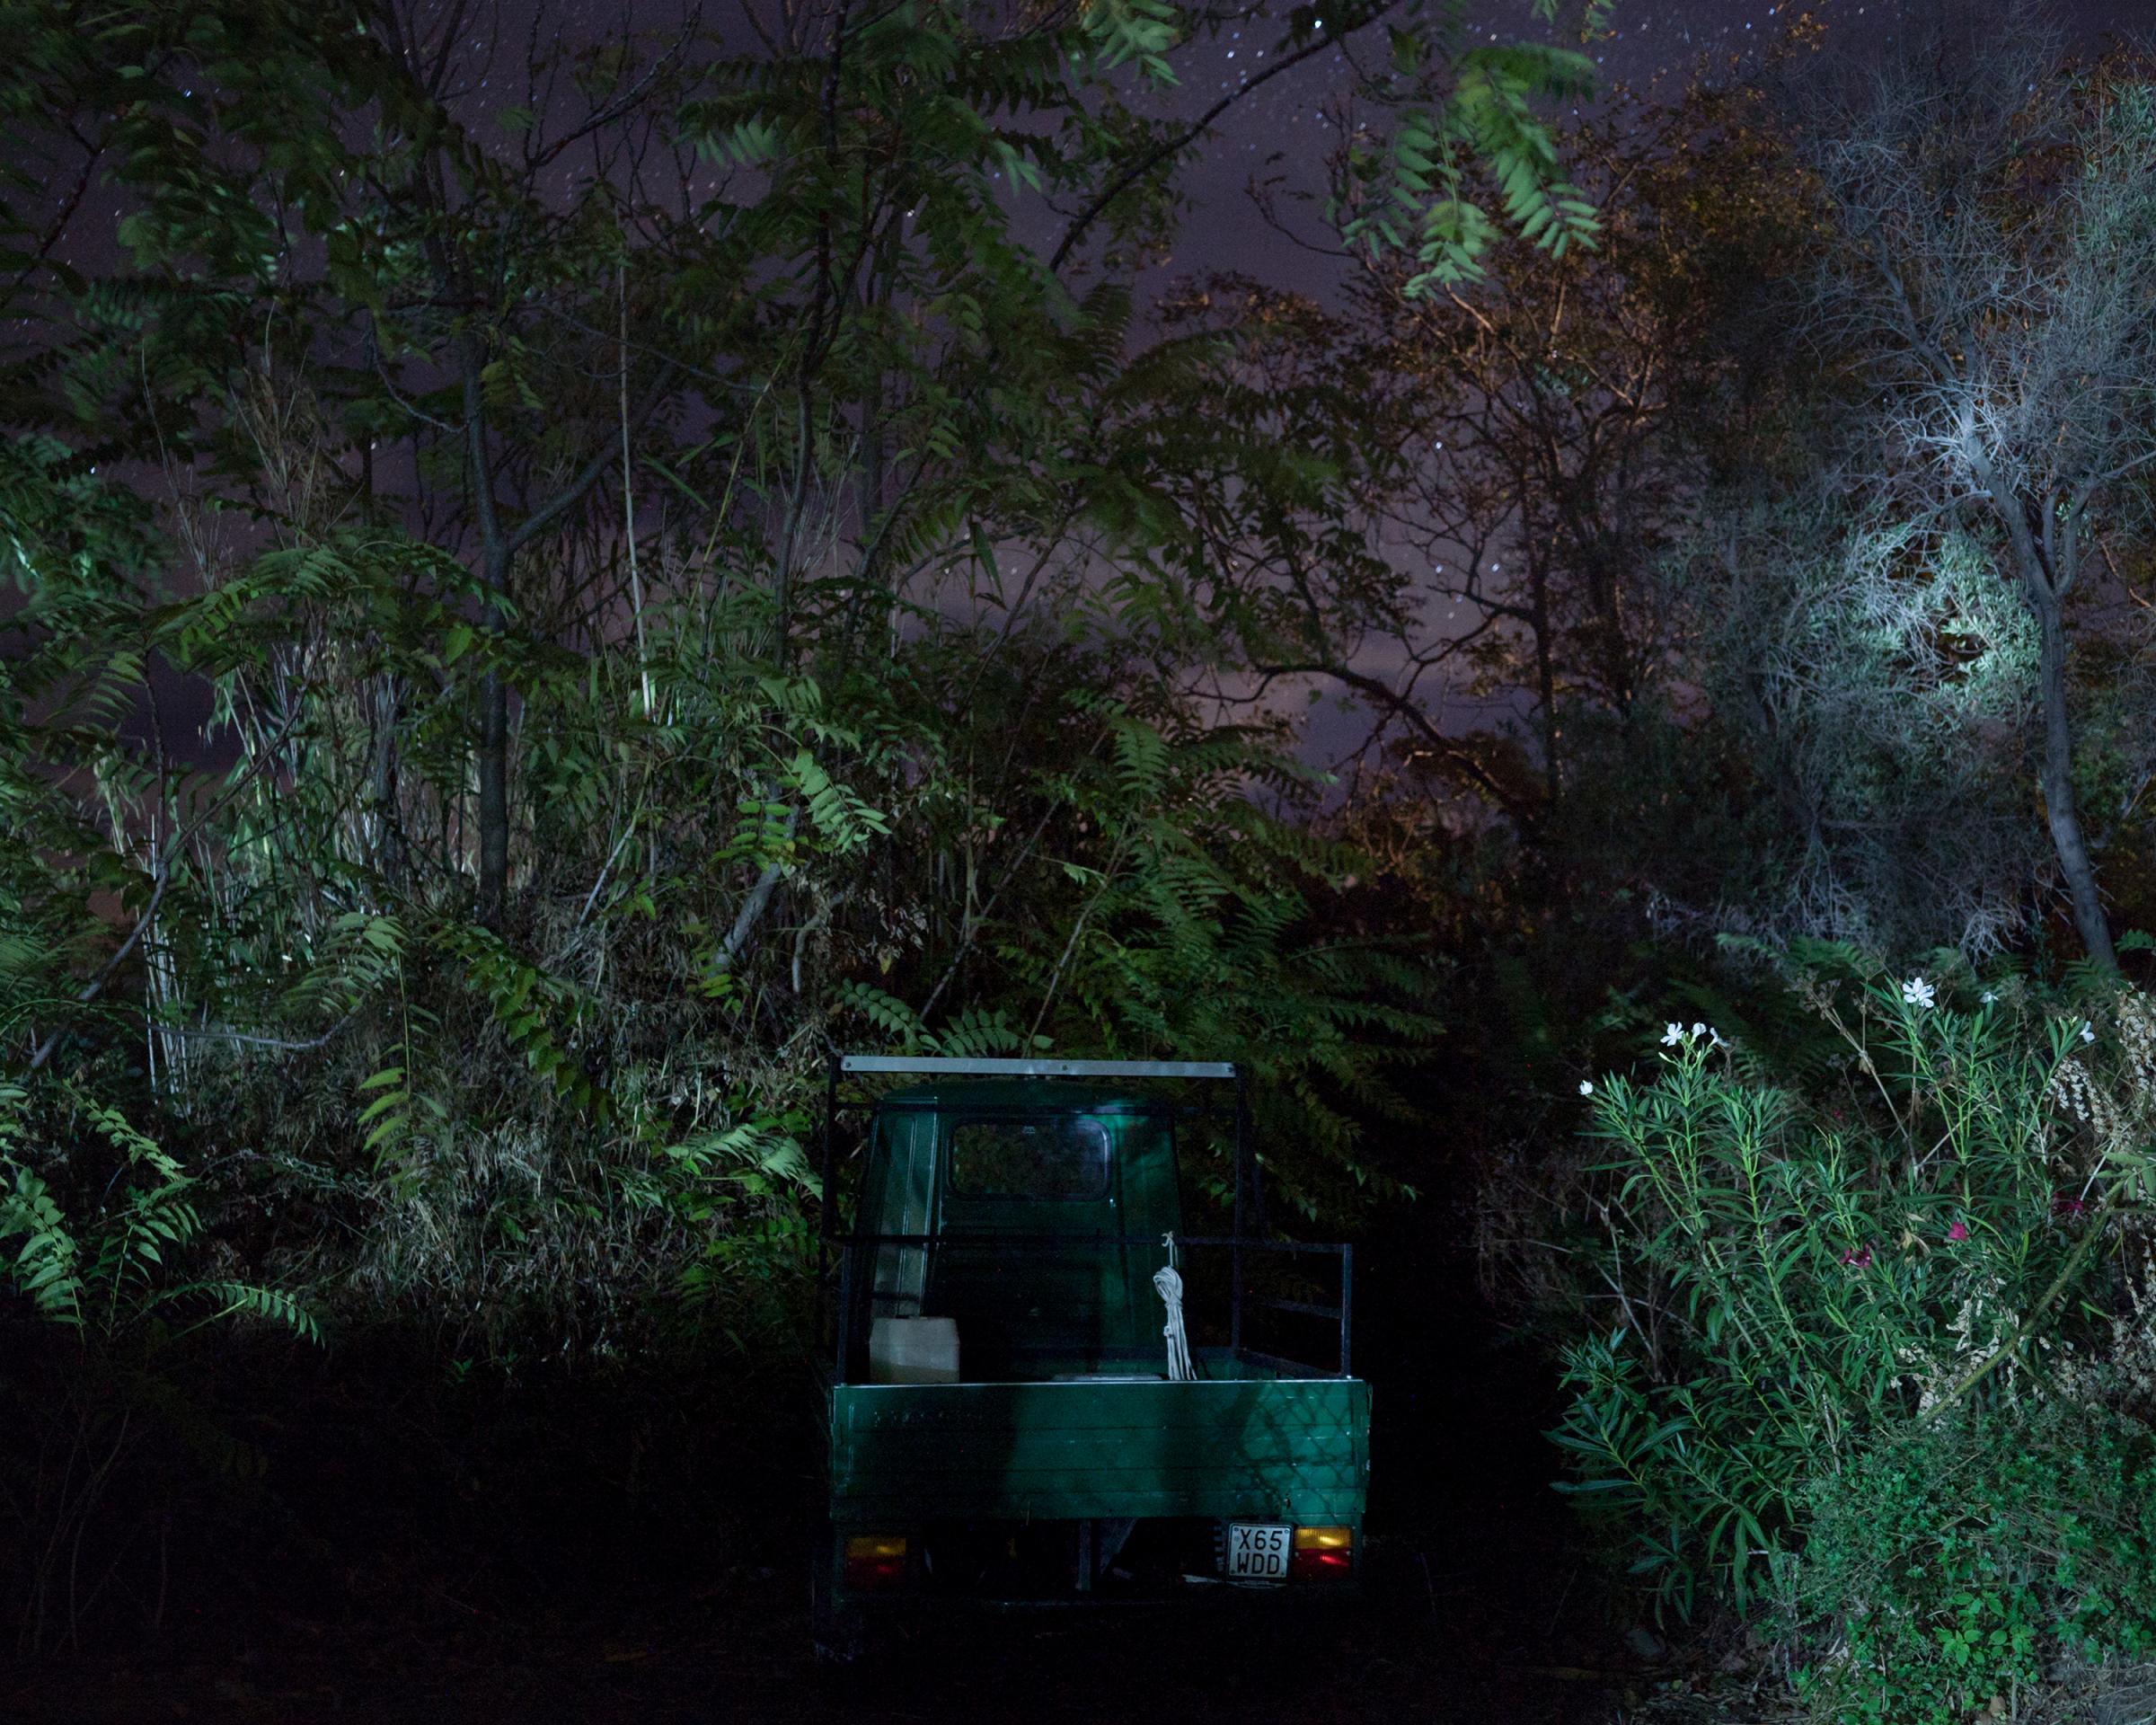 Visura interviews photographer Gaia Squarci - An Ape Car is photographed at night on Stromboli island. There are no lights in the streets on...